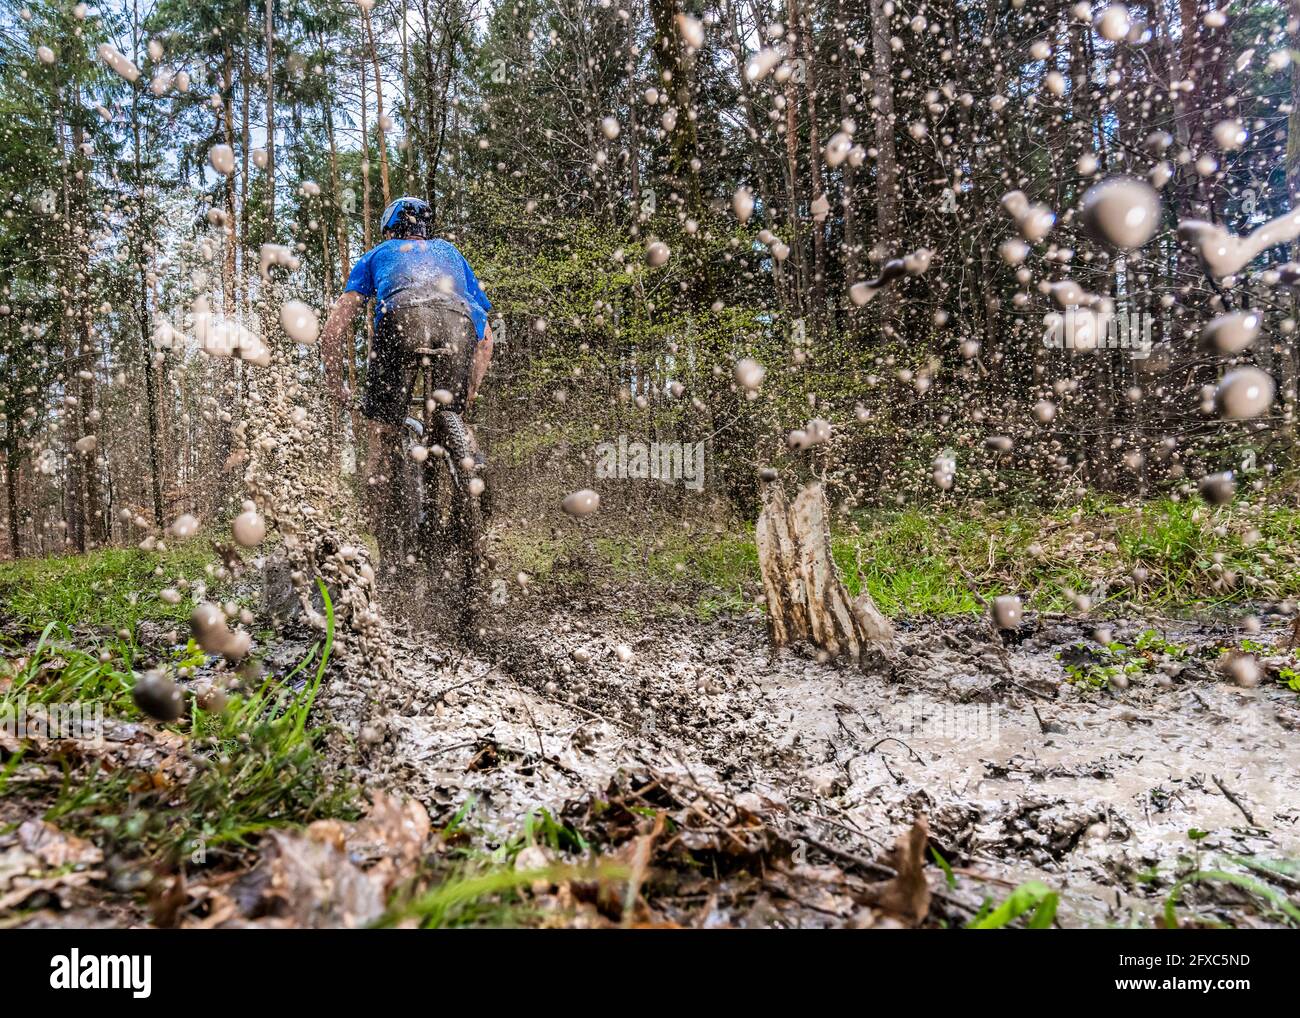 Young man riding mountain bike through mud in forest Stock Photo